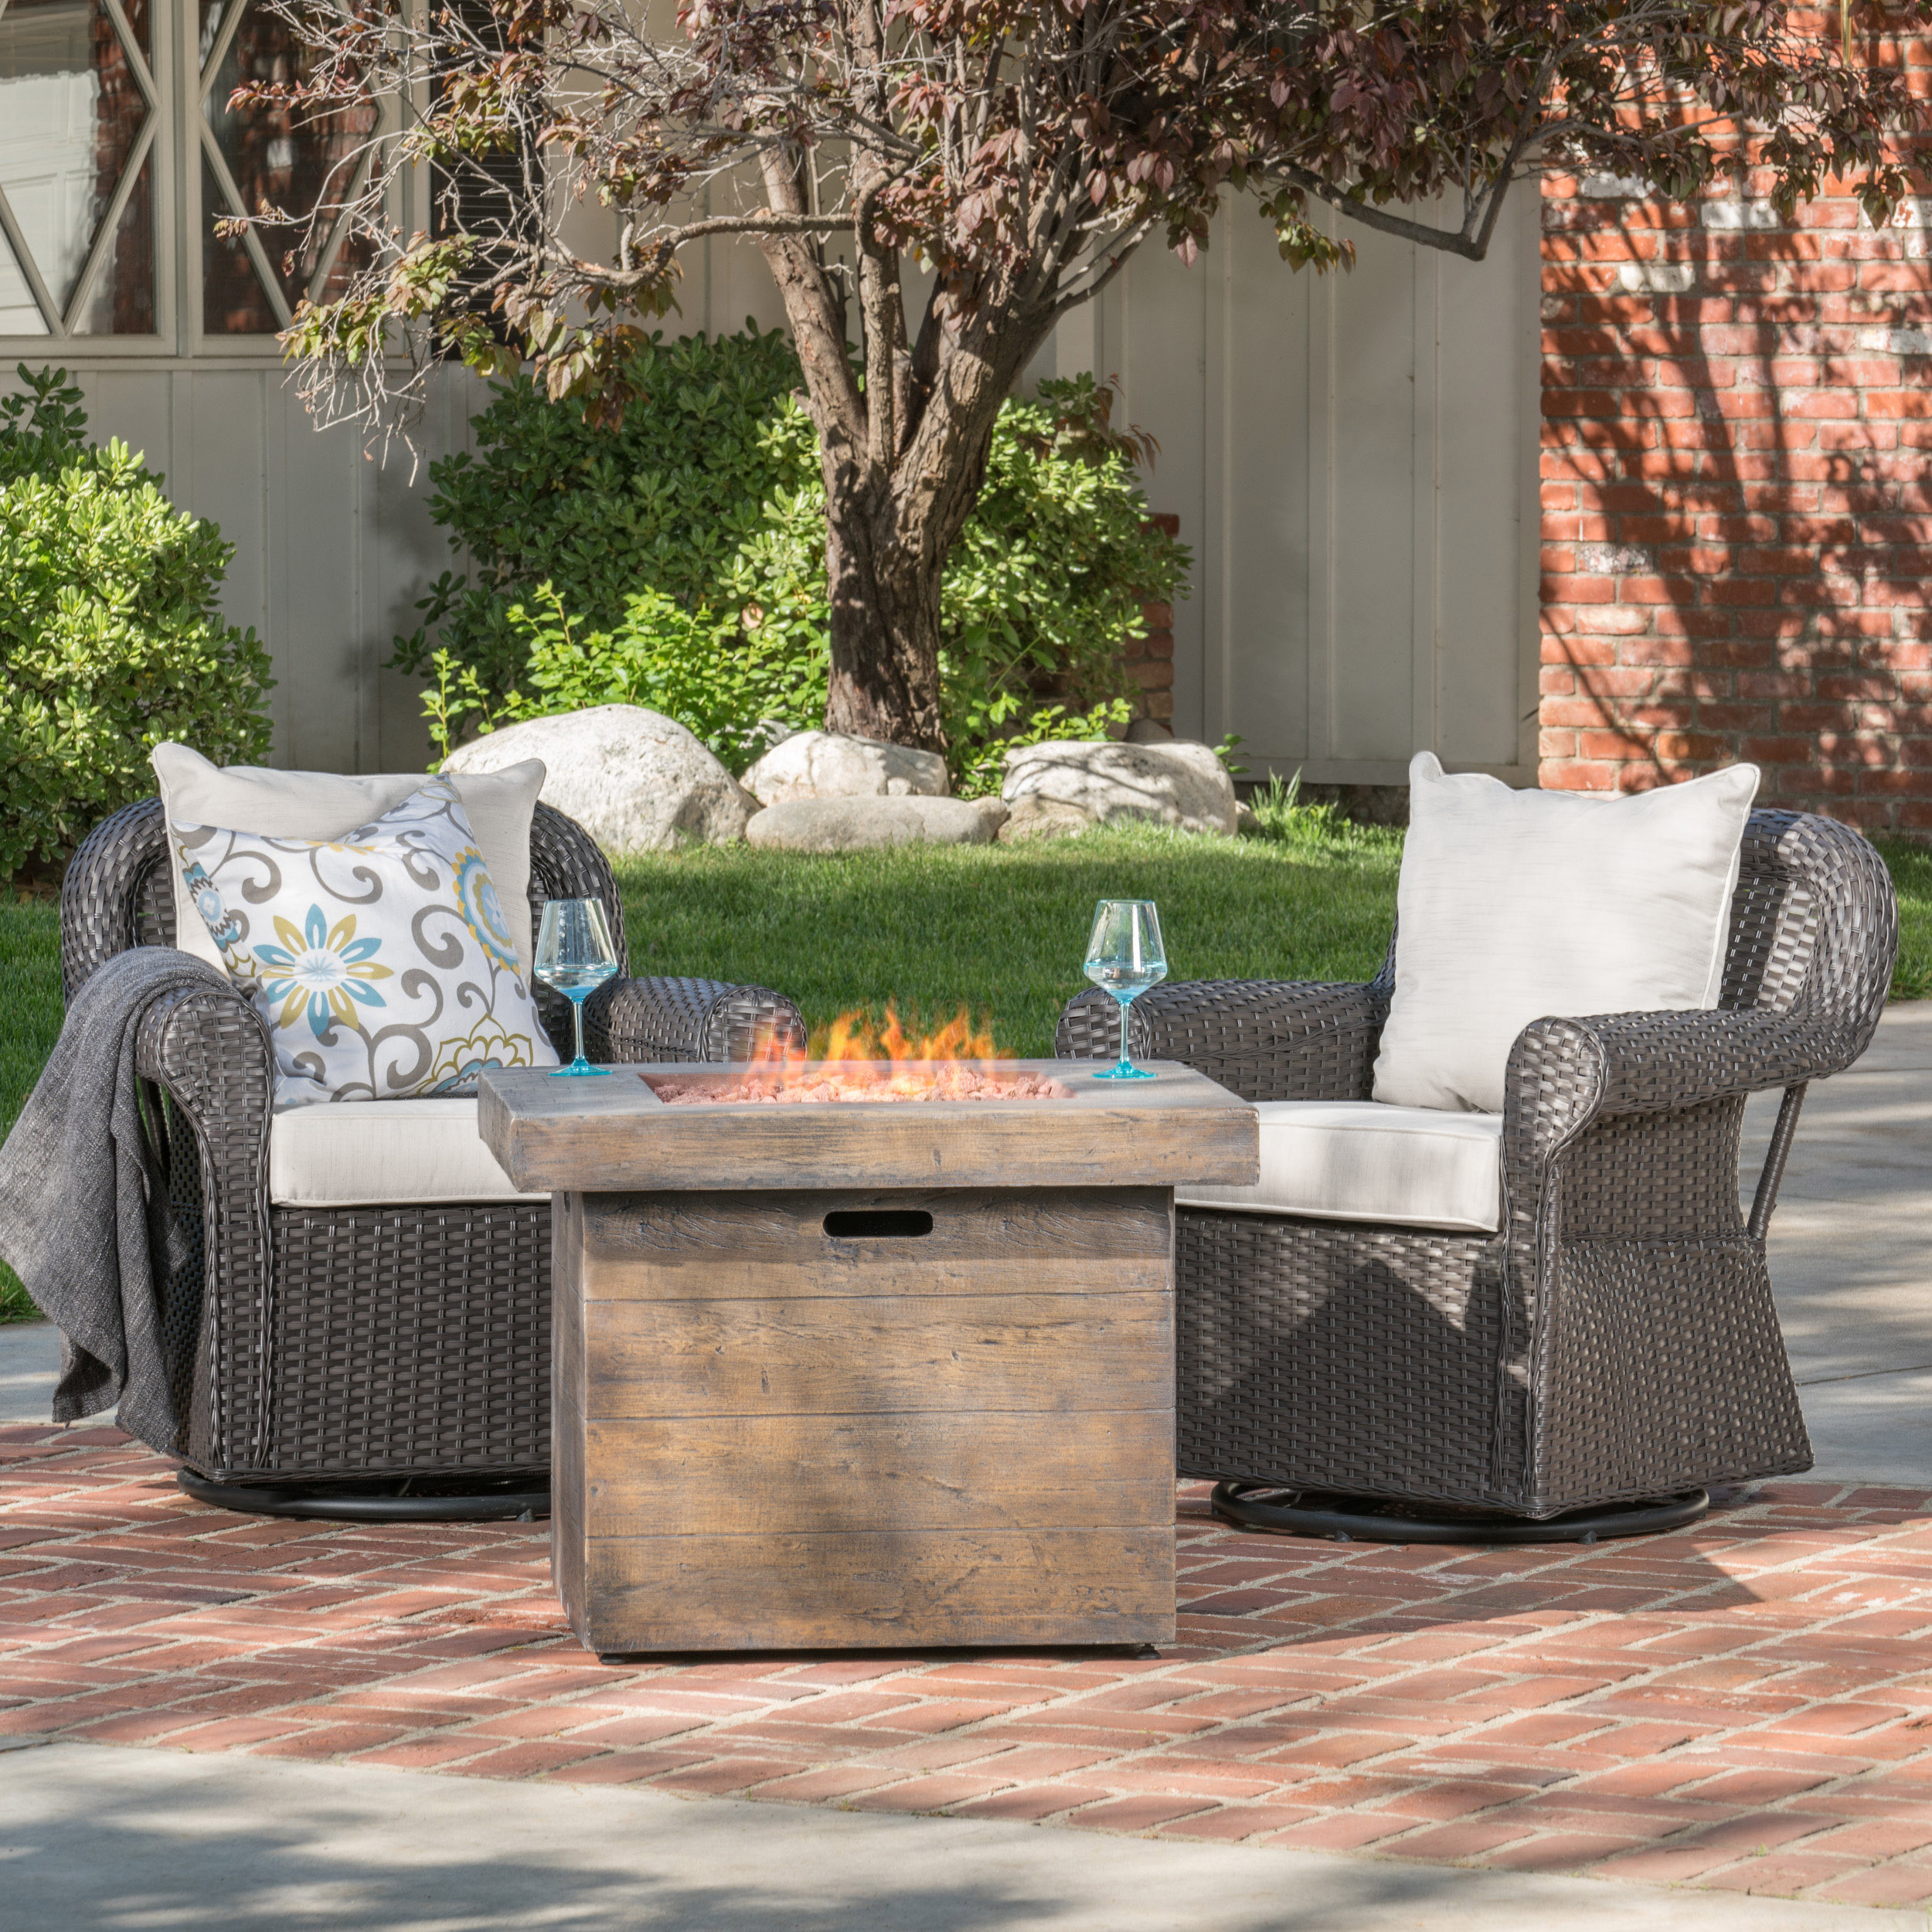 GDF Studio Caldwell Outdoor Wicker Swivel Club Chair and Fire Pit Set with Cushions, 3 Piece Dark Brown, Beige, and Natural - image 2 of 14